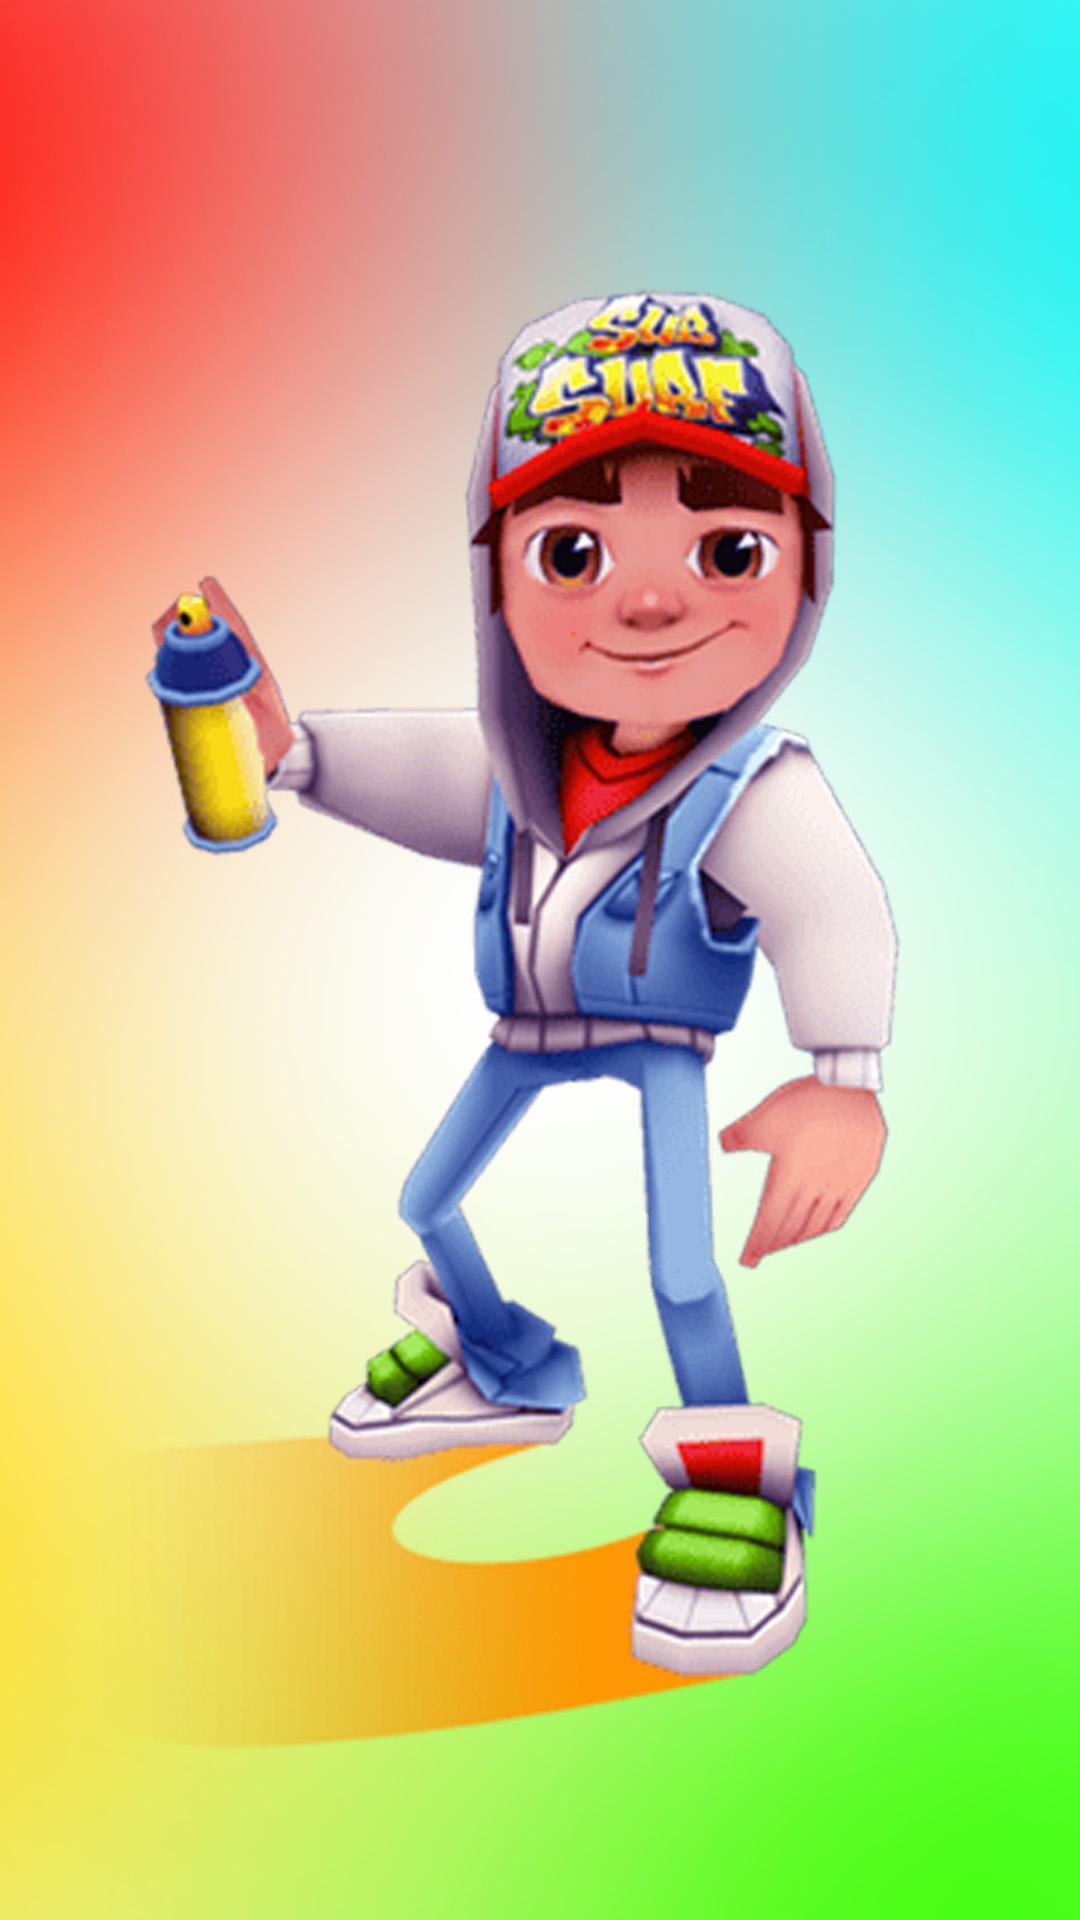 subway surfers download android 4.0